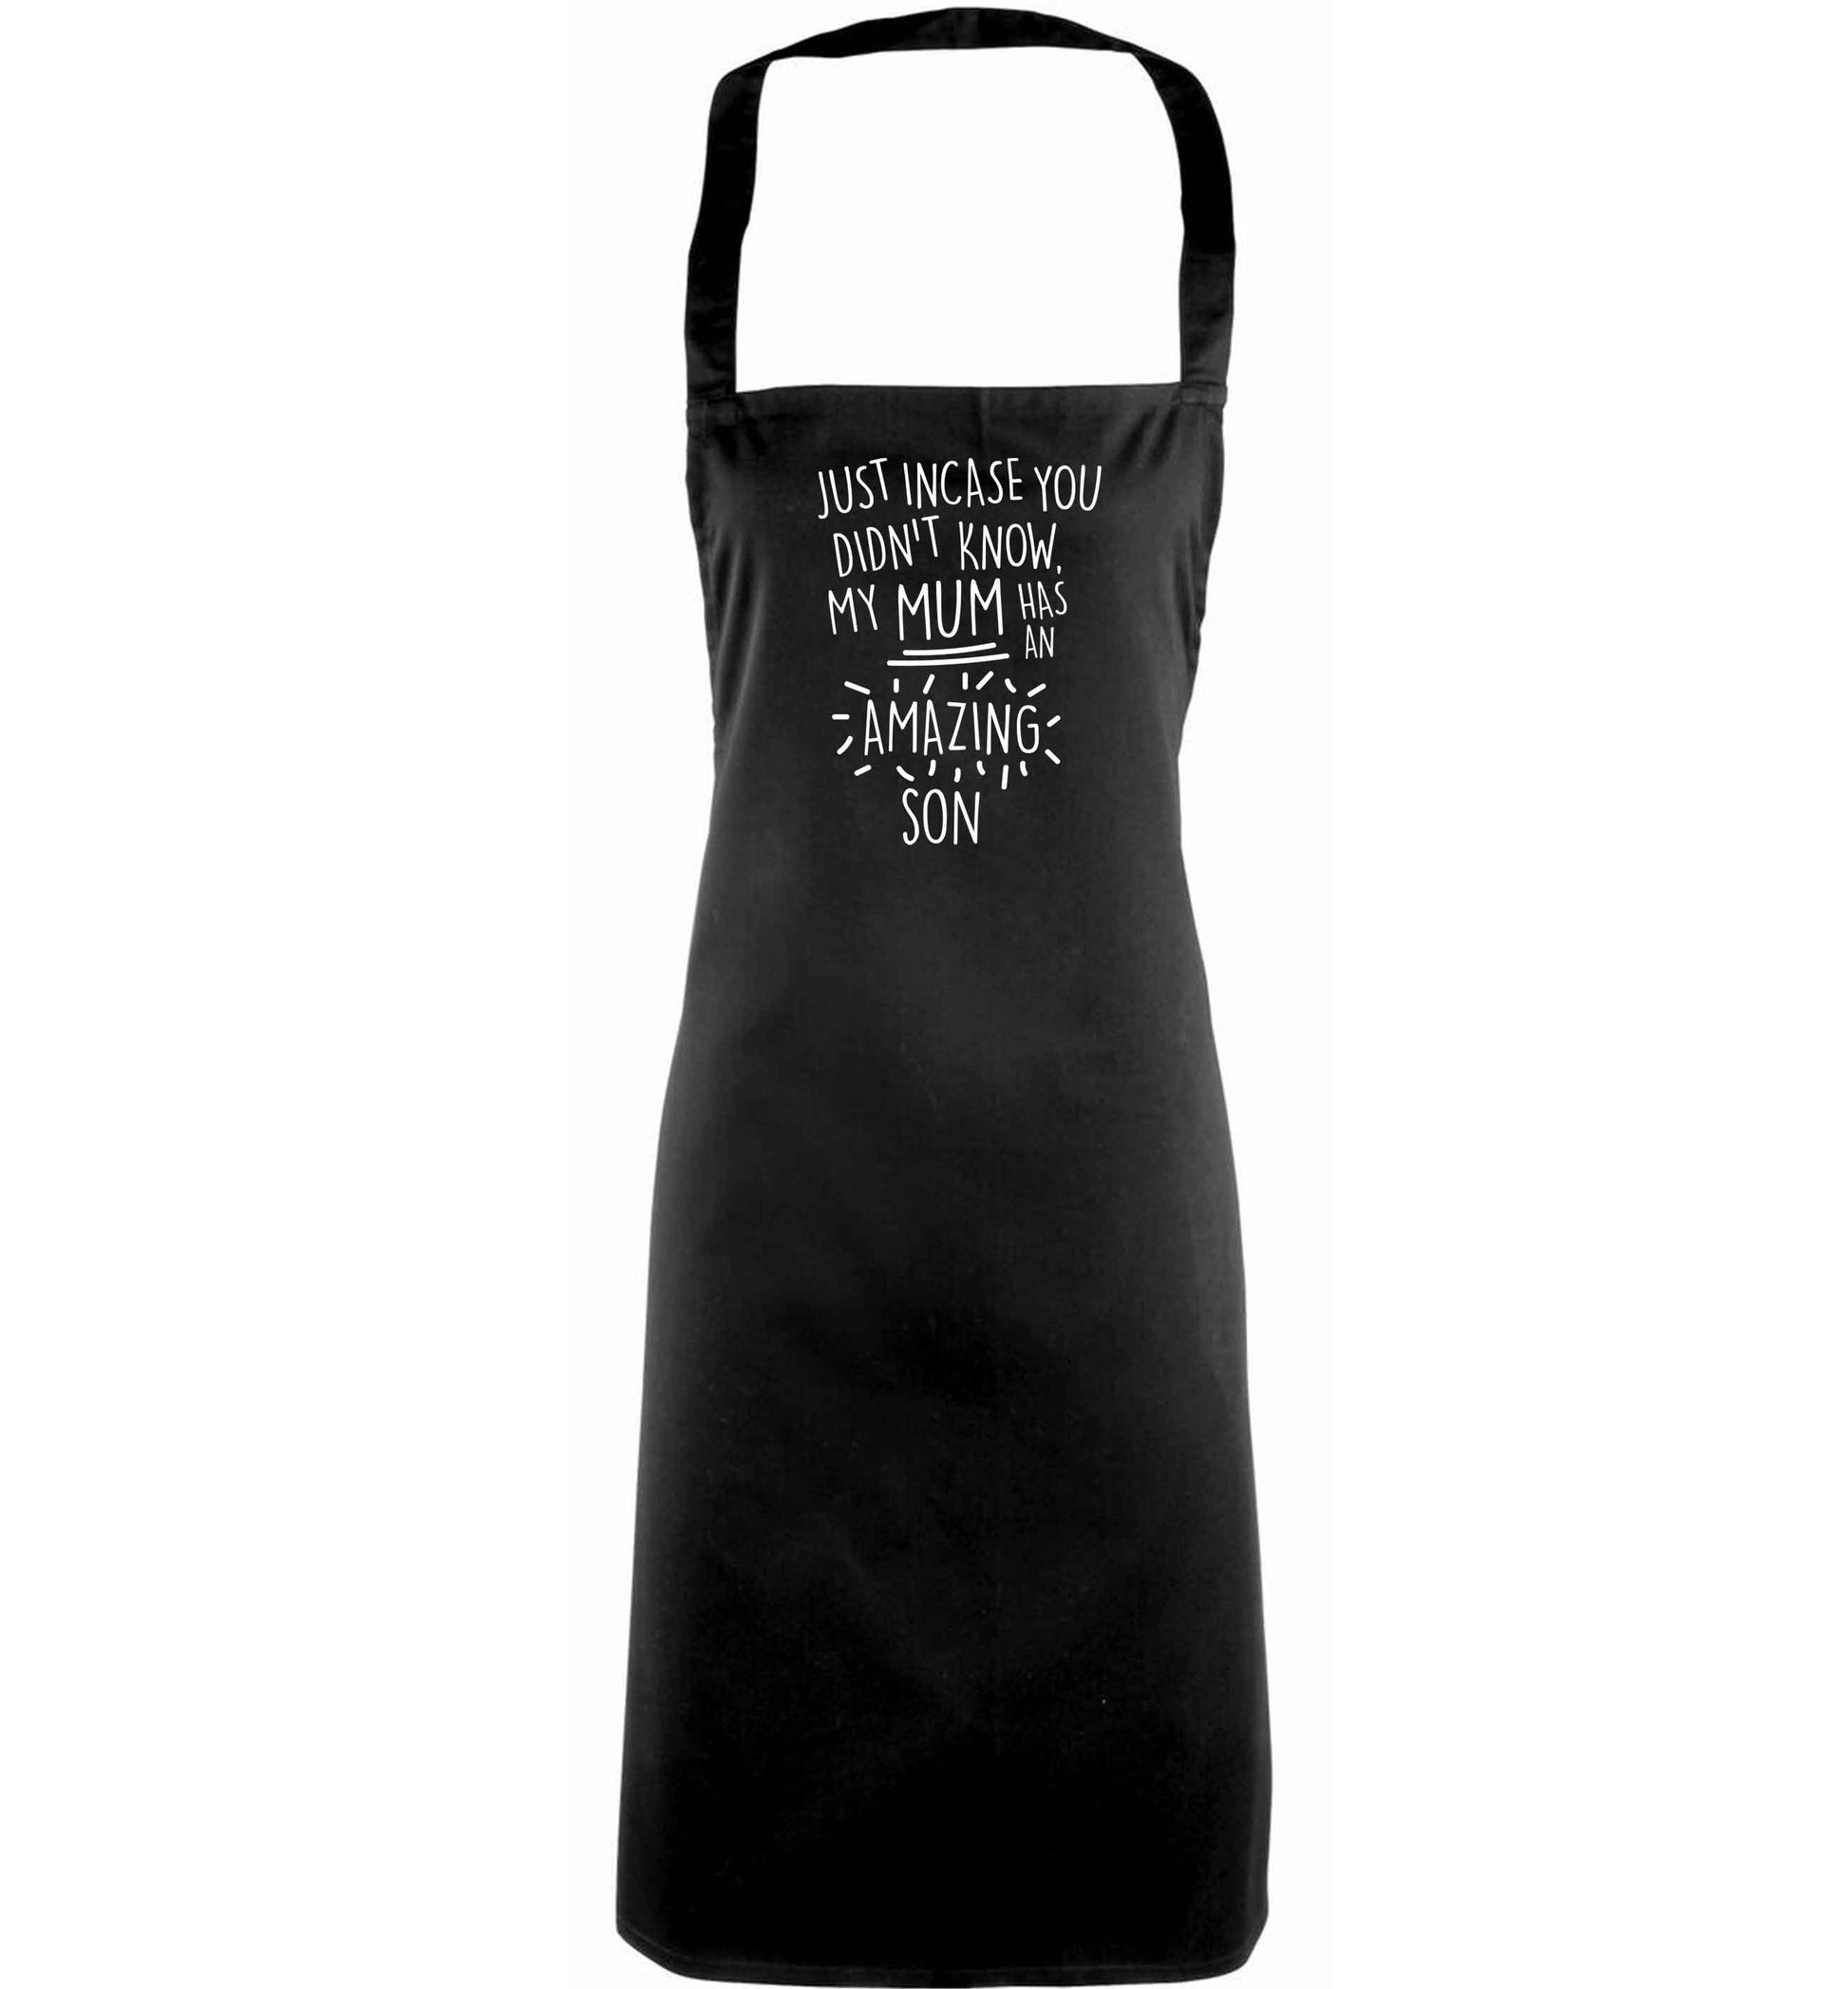 Just incase you didn't know my mum has an amazing son adults black apron